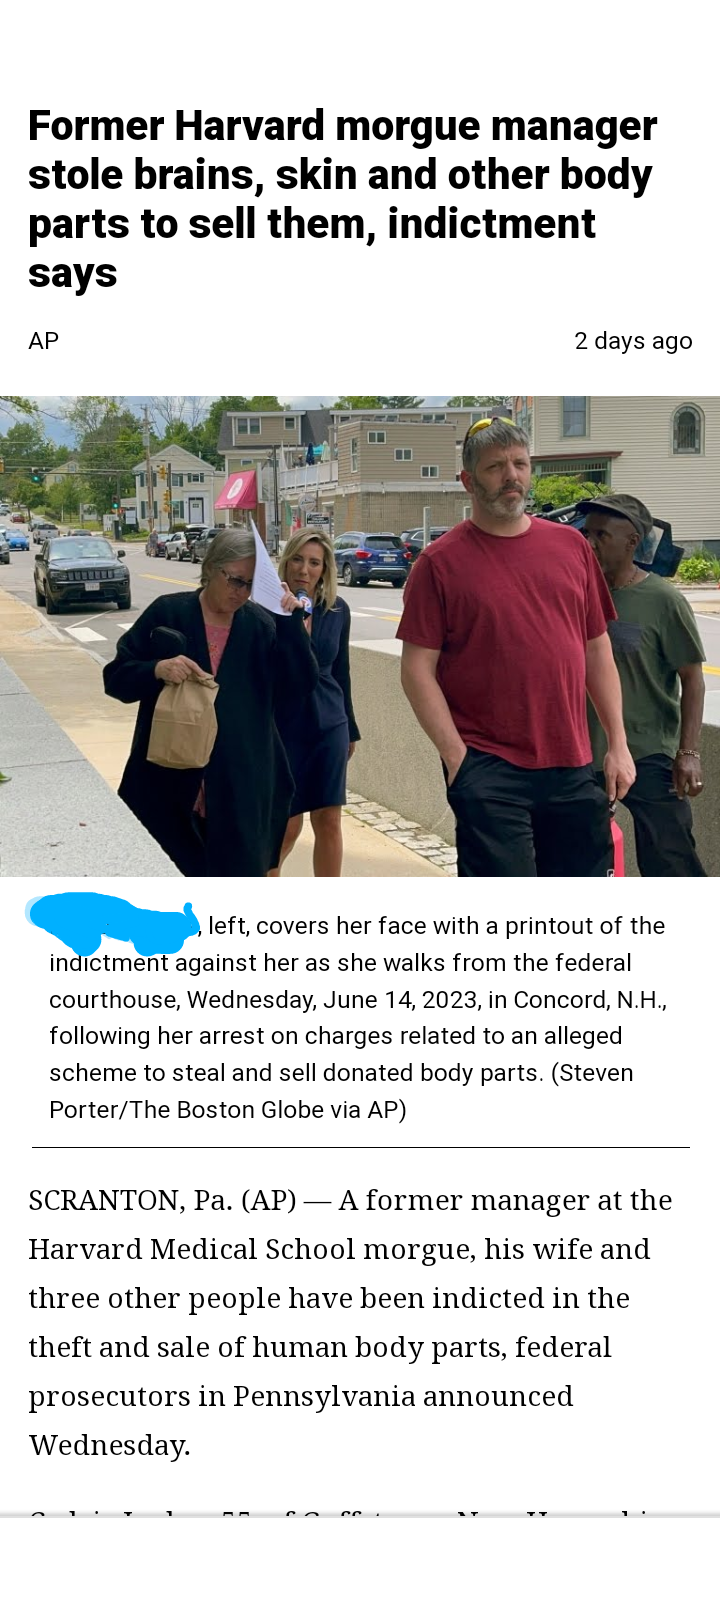 trashy people - media - Former Harvard morgue manager stole brains, skin and other body parts to sell them, indictment says Ap 2 days ago left, covers her face with a printout of the indictment against her as she walks from the federal courthouse, Wednesd